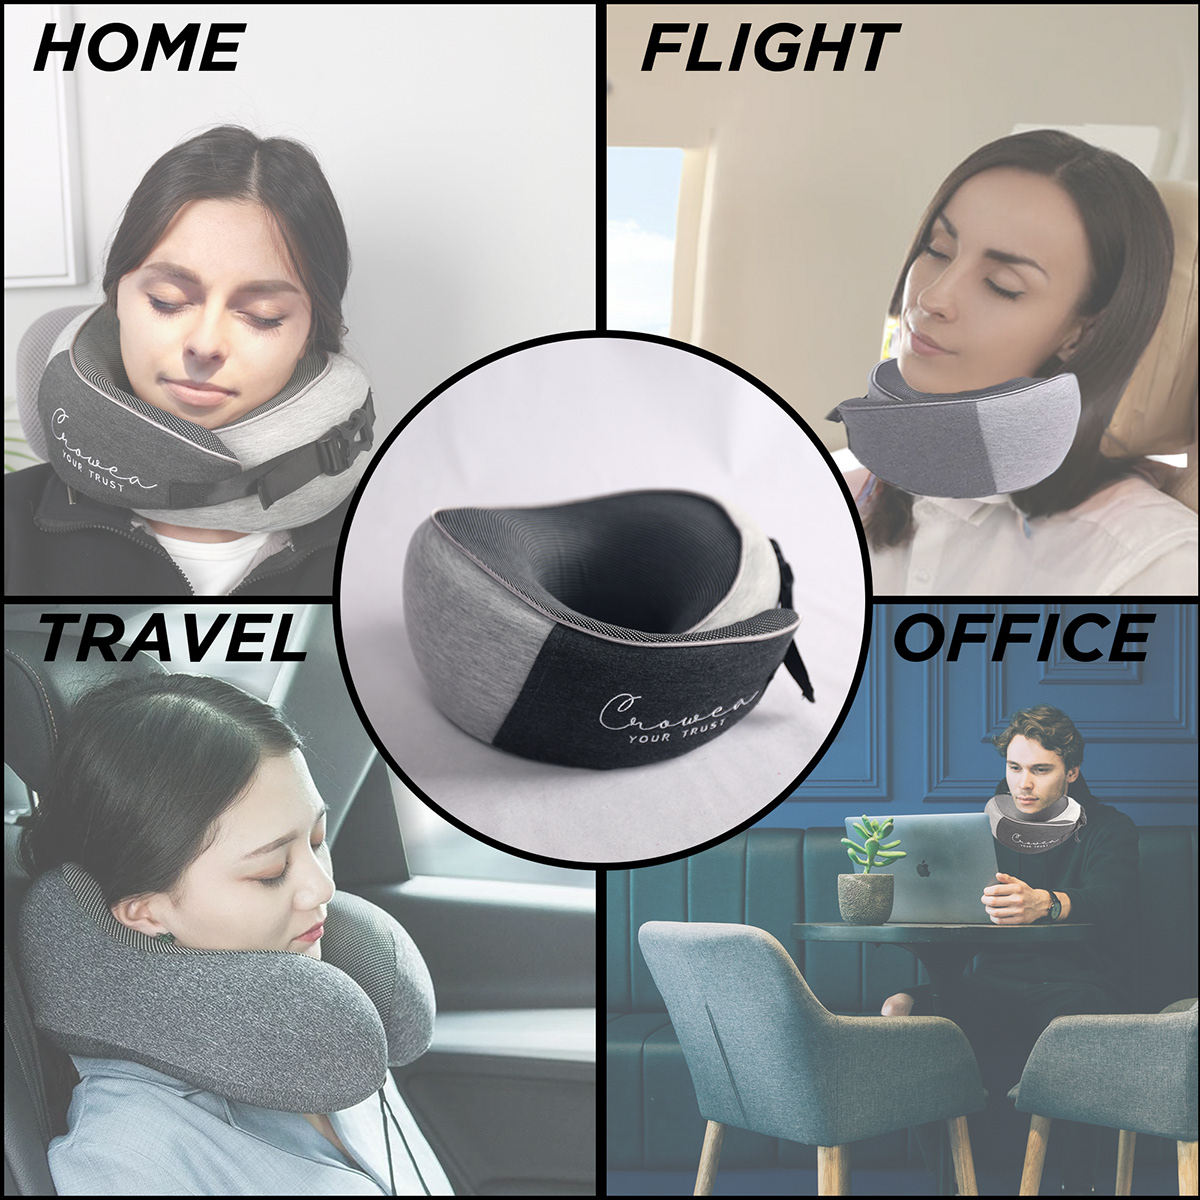 Amazon Amazon Listing infographic Listing Images travel pillow A+ Content Amazon Product Listing image design Product Infographic AMAZON LISTING IMAGES